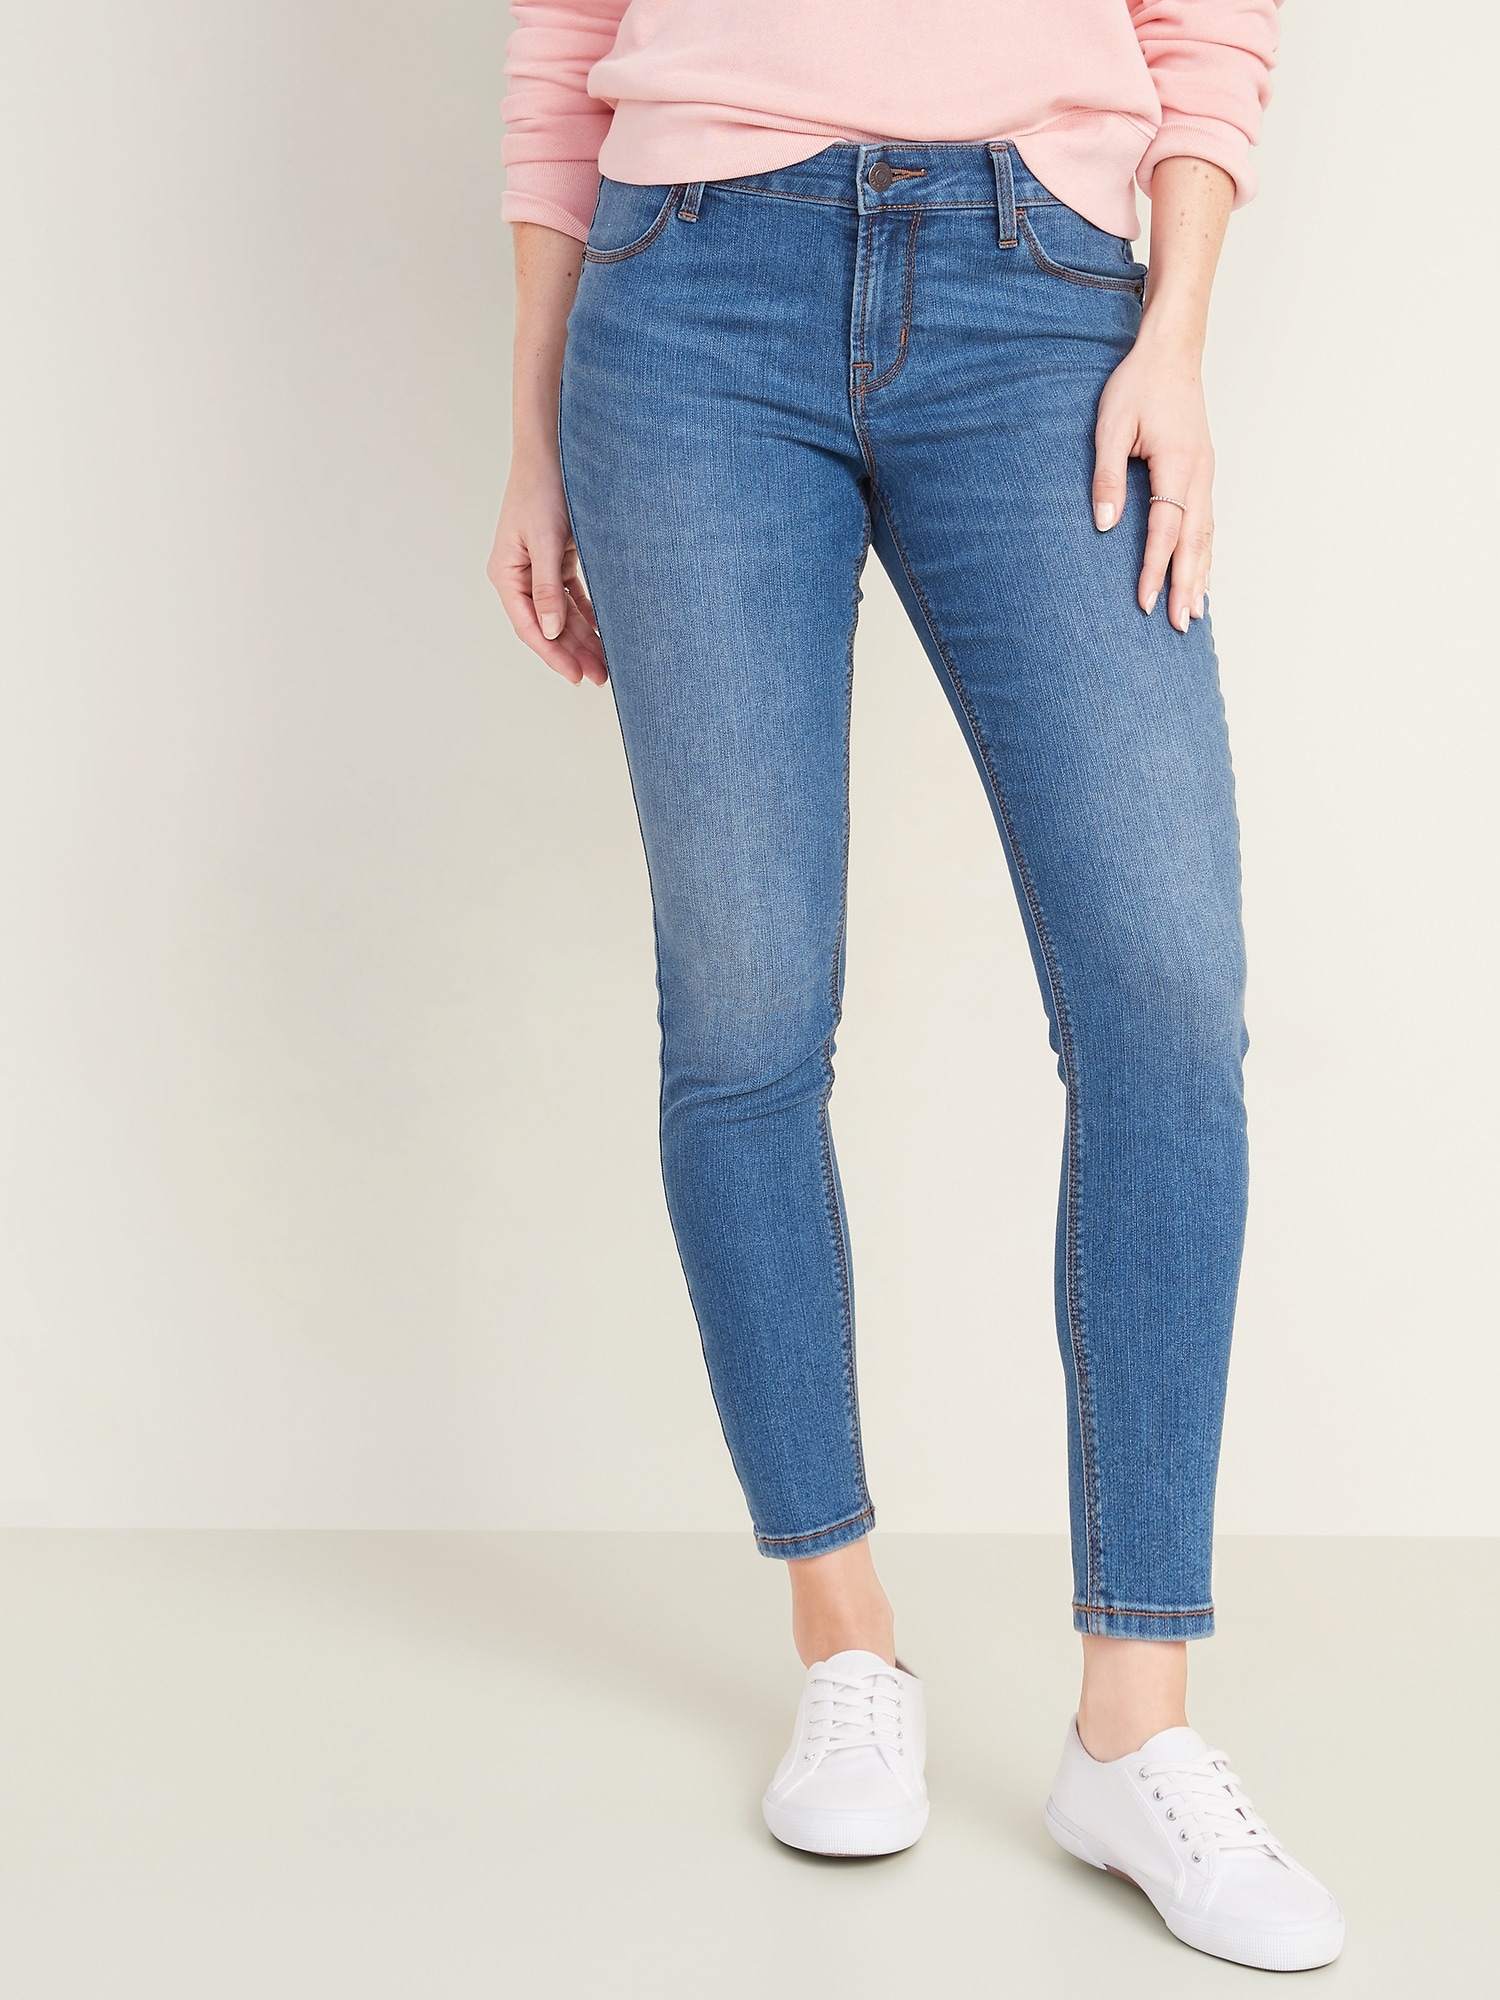 old navy soft jeans